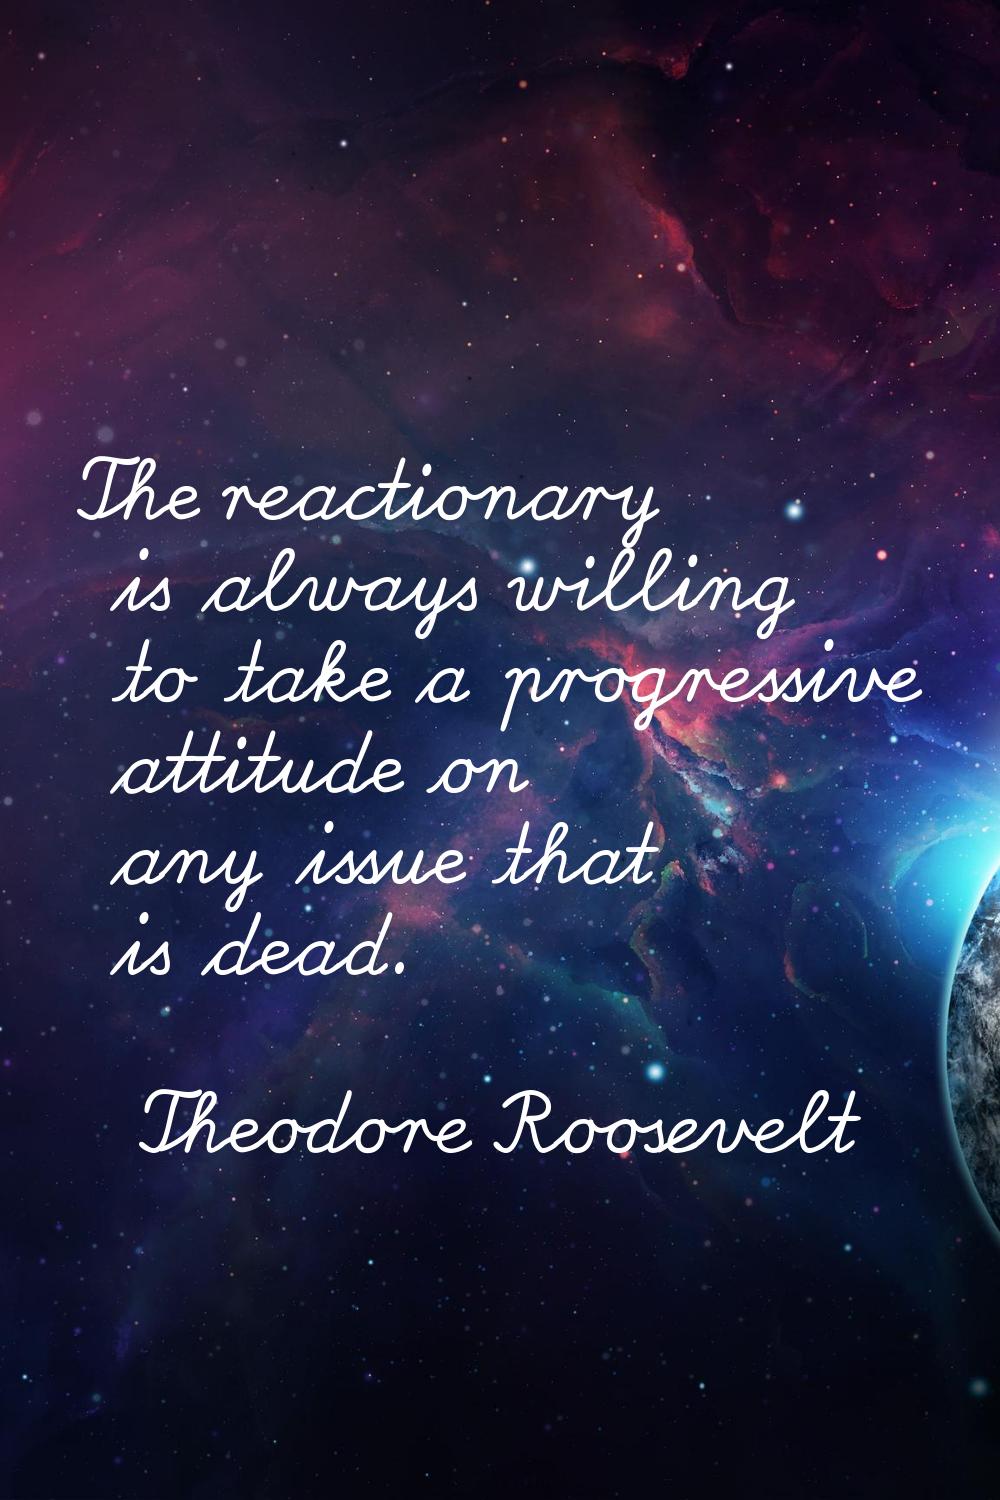 The reactionary is always willing to take a progressive attitude on any issue that is dead.